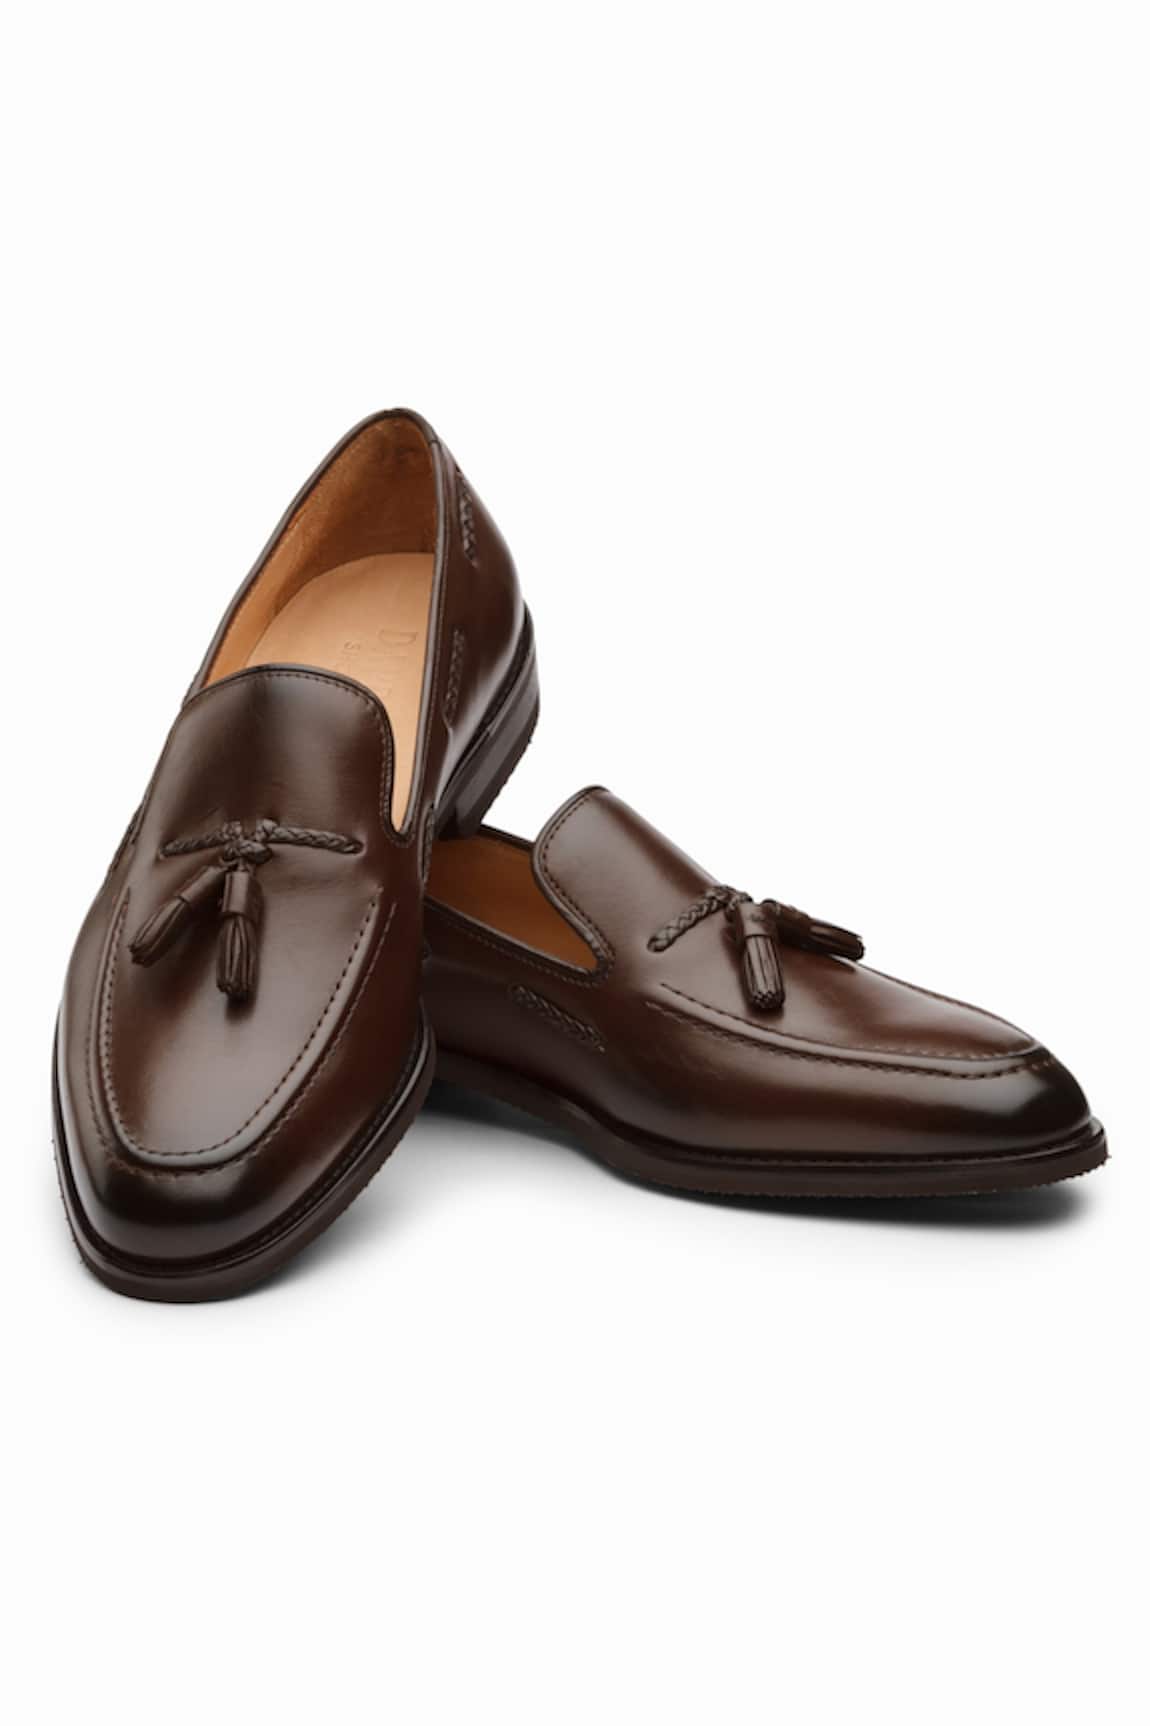 dapper Shoes Handcrafted Tassel Loafers